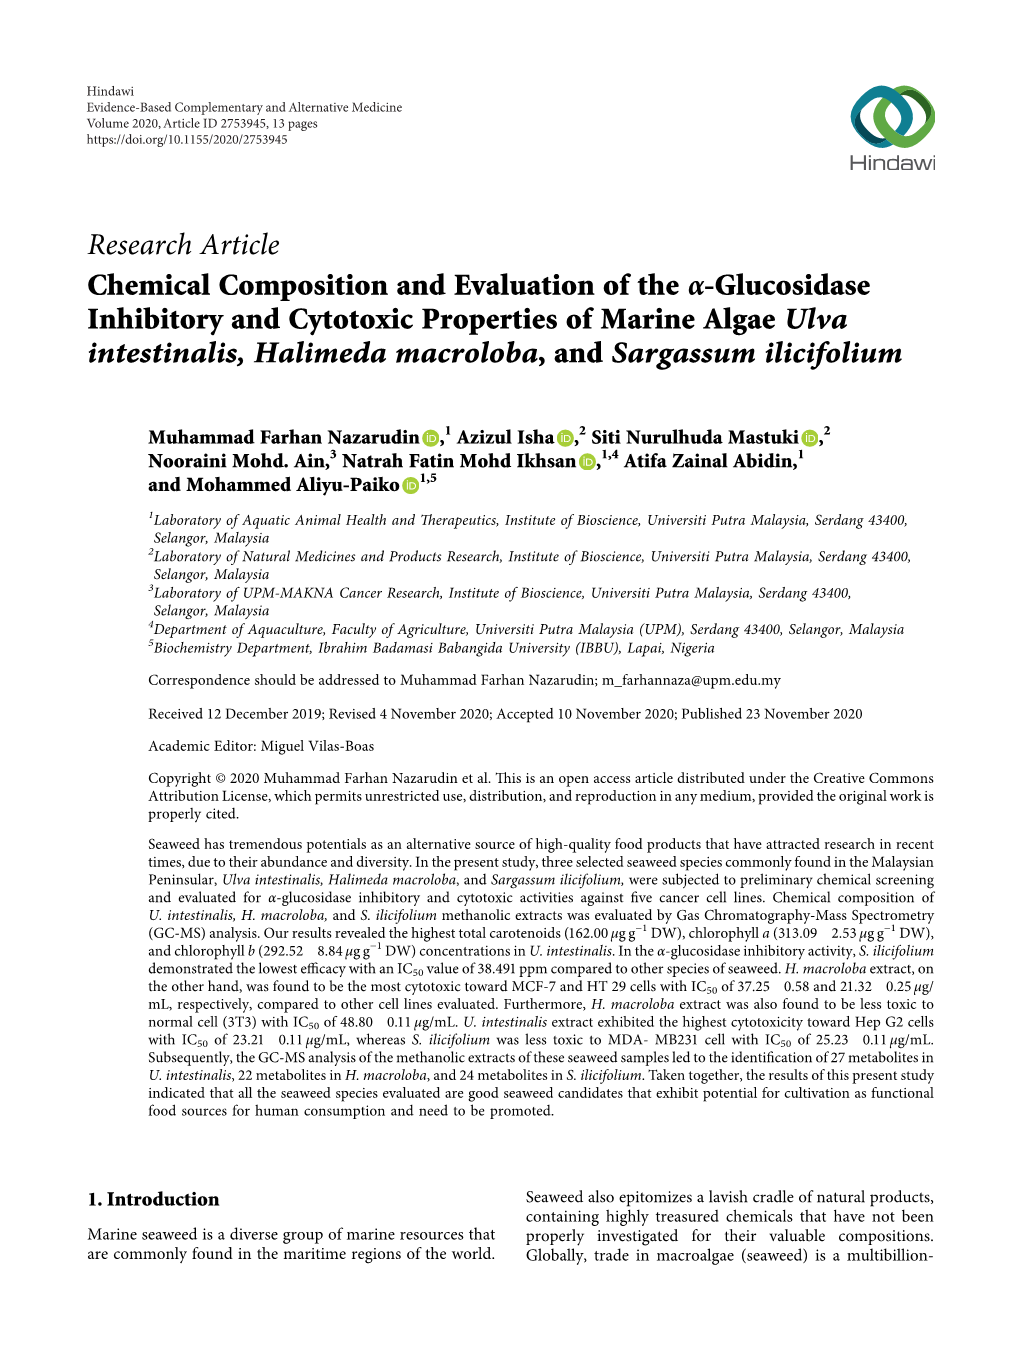 Chemical Composition and Evaluation of the Α-Glucosidase Inhibitory And